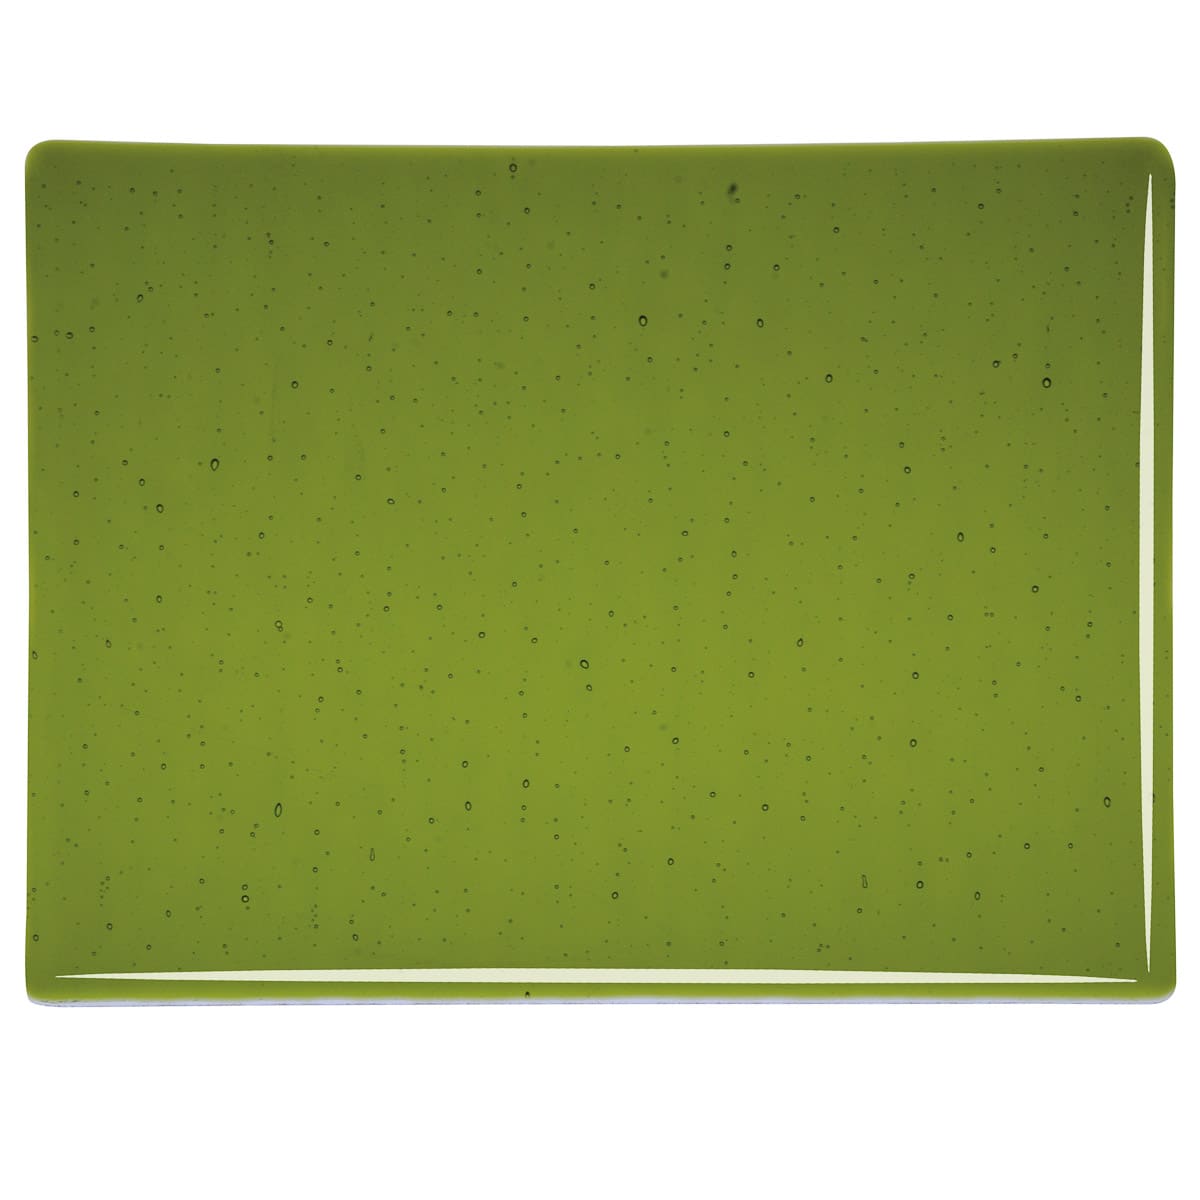 001226 Transparent Lily Pad Green sheet glass swatch